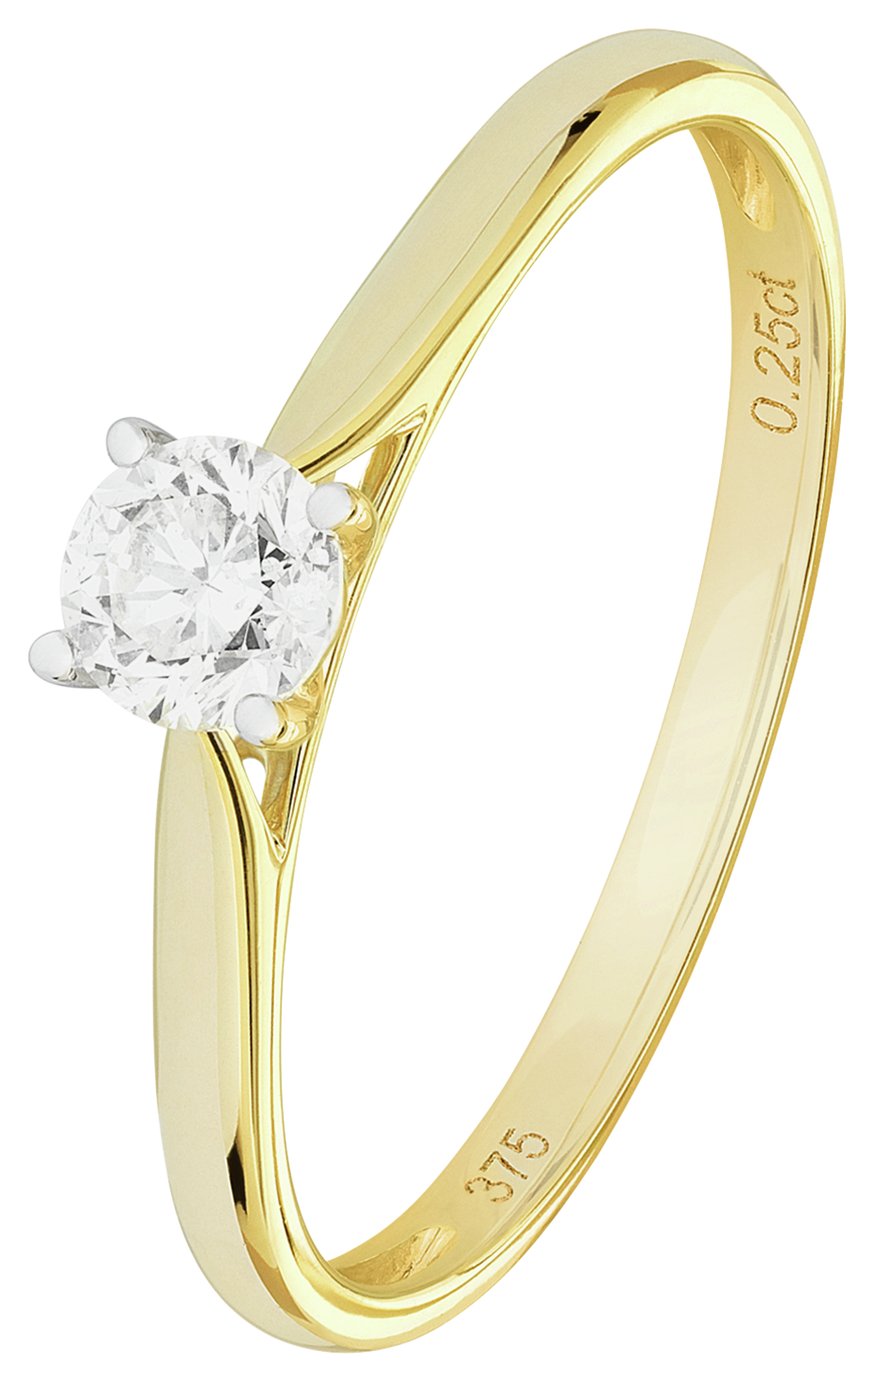 Revere 9ct Gold 0.25ct Diamond Solitaire Engagement Ring - N